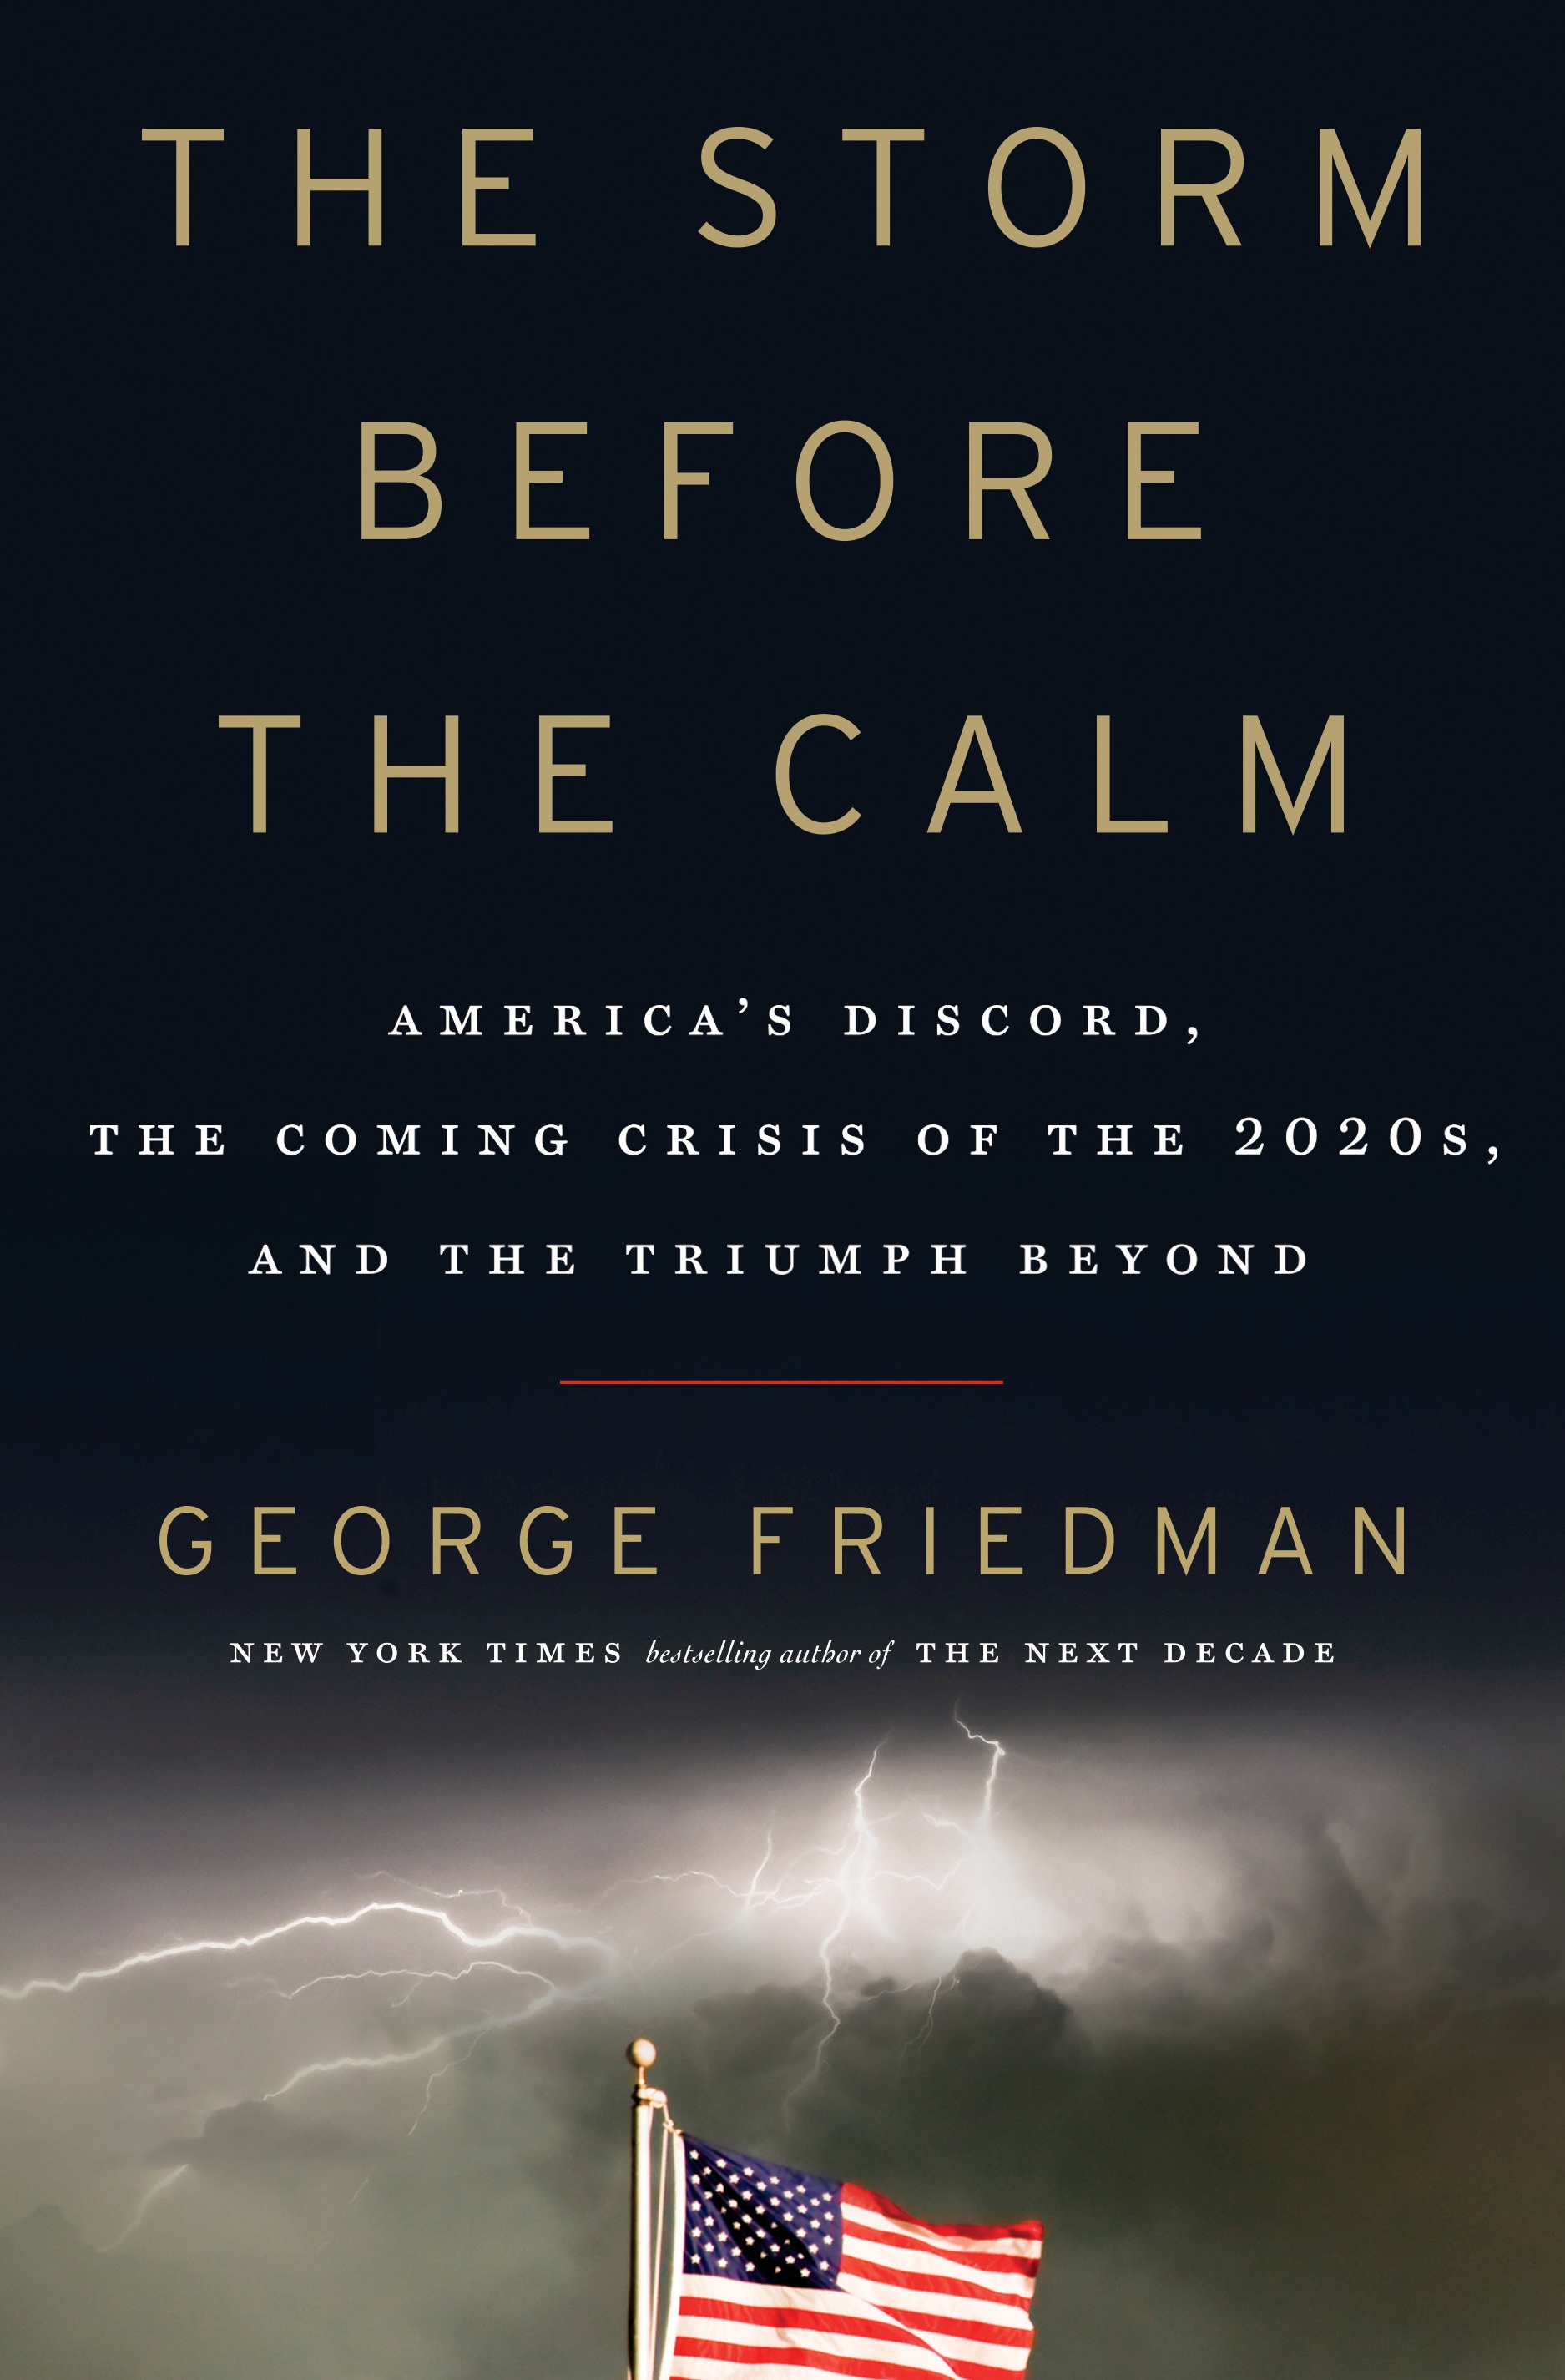 Making History: The Calm & The Storm - Wikipedia